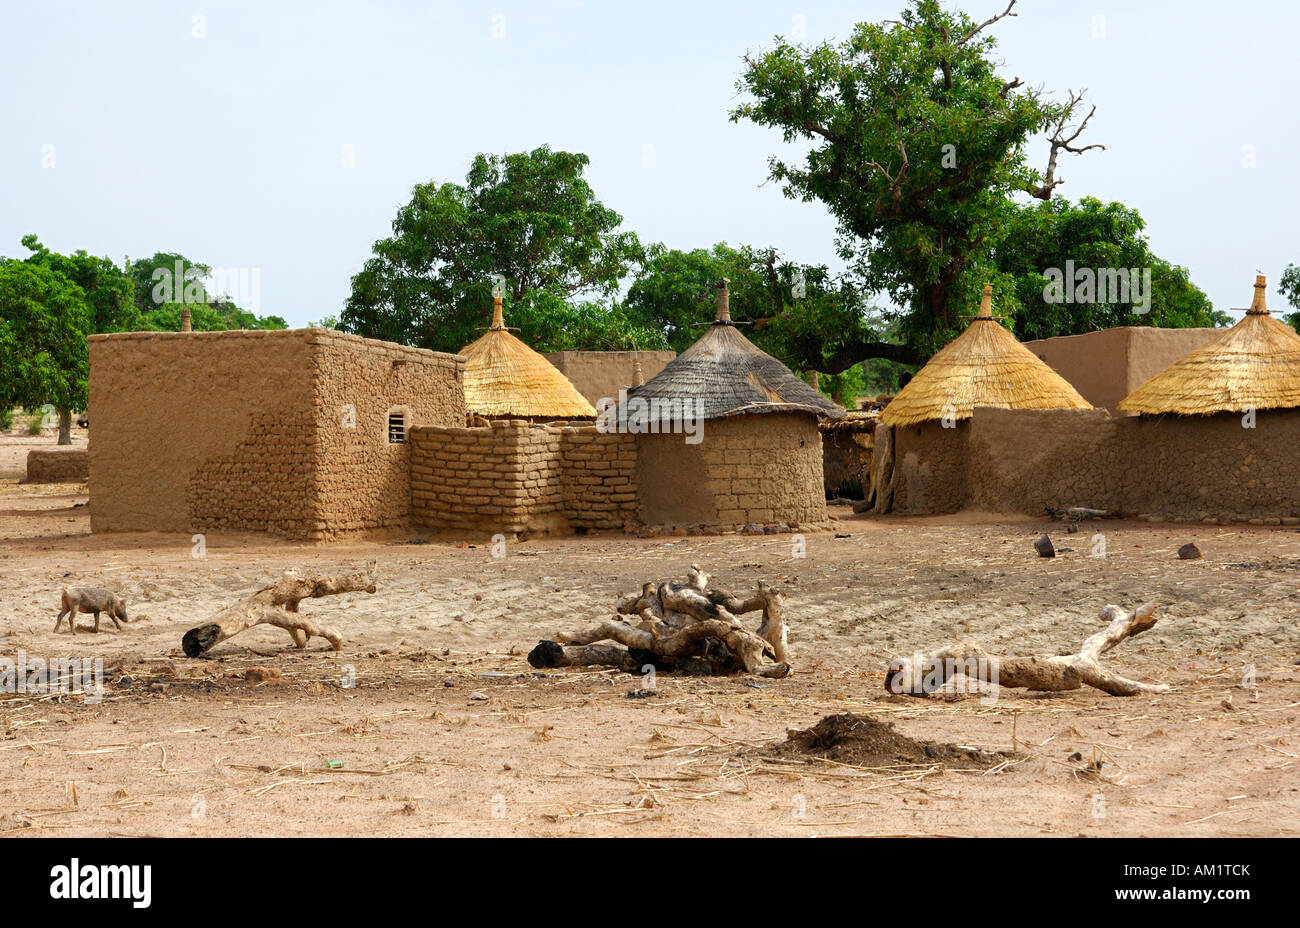 Traditional homestead with granaries, family home, fire place and pig, Burkina Faso Stock Photo